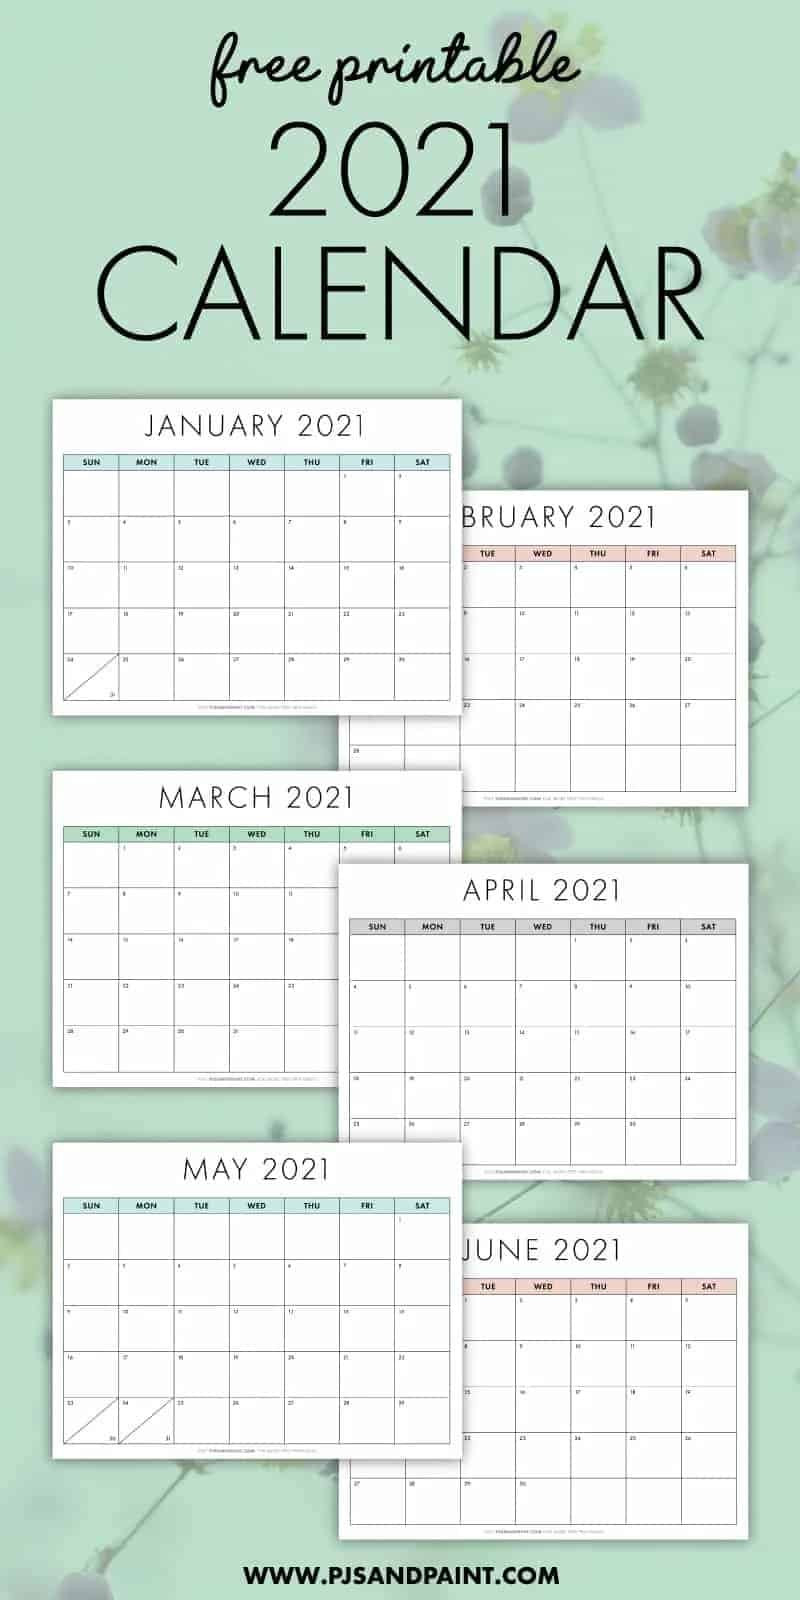 13 Cute Free Printable Calendars For 2021 You&#039;Ll Love-2021 Calendar Printable Two Page